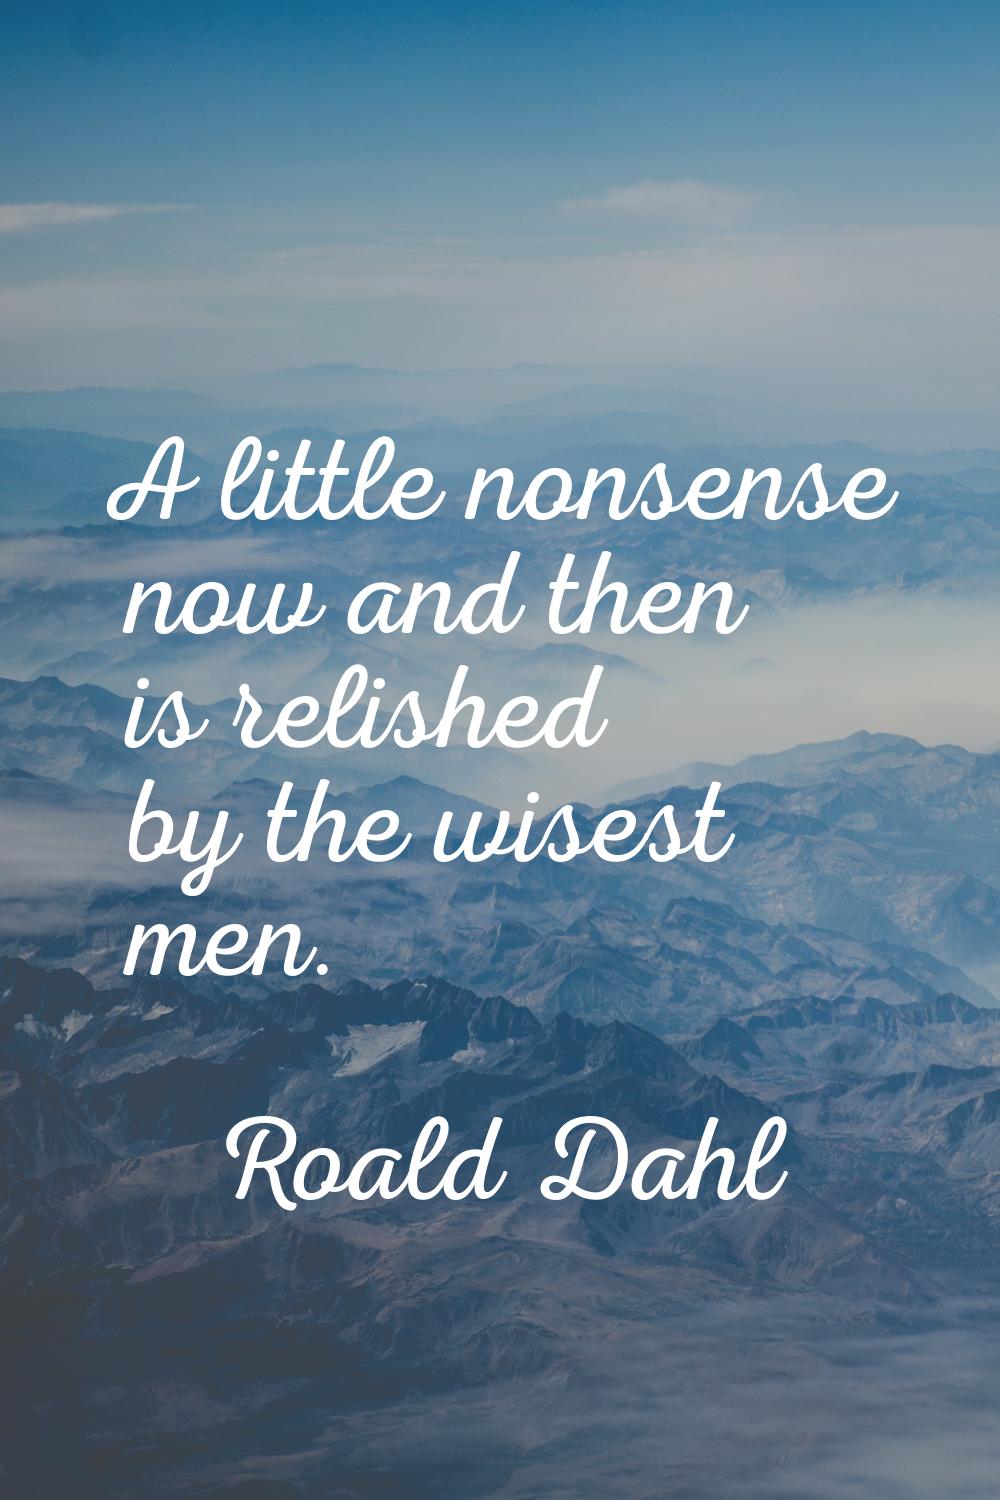 A little nonsense now and then is relished by the wisest men.